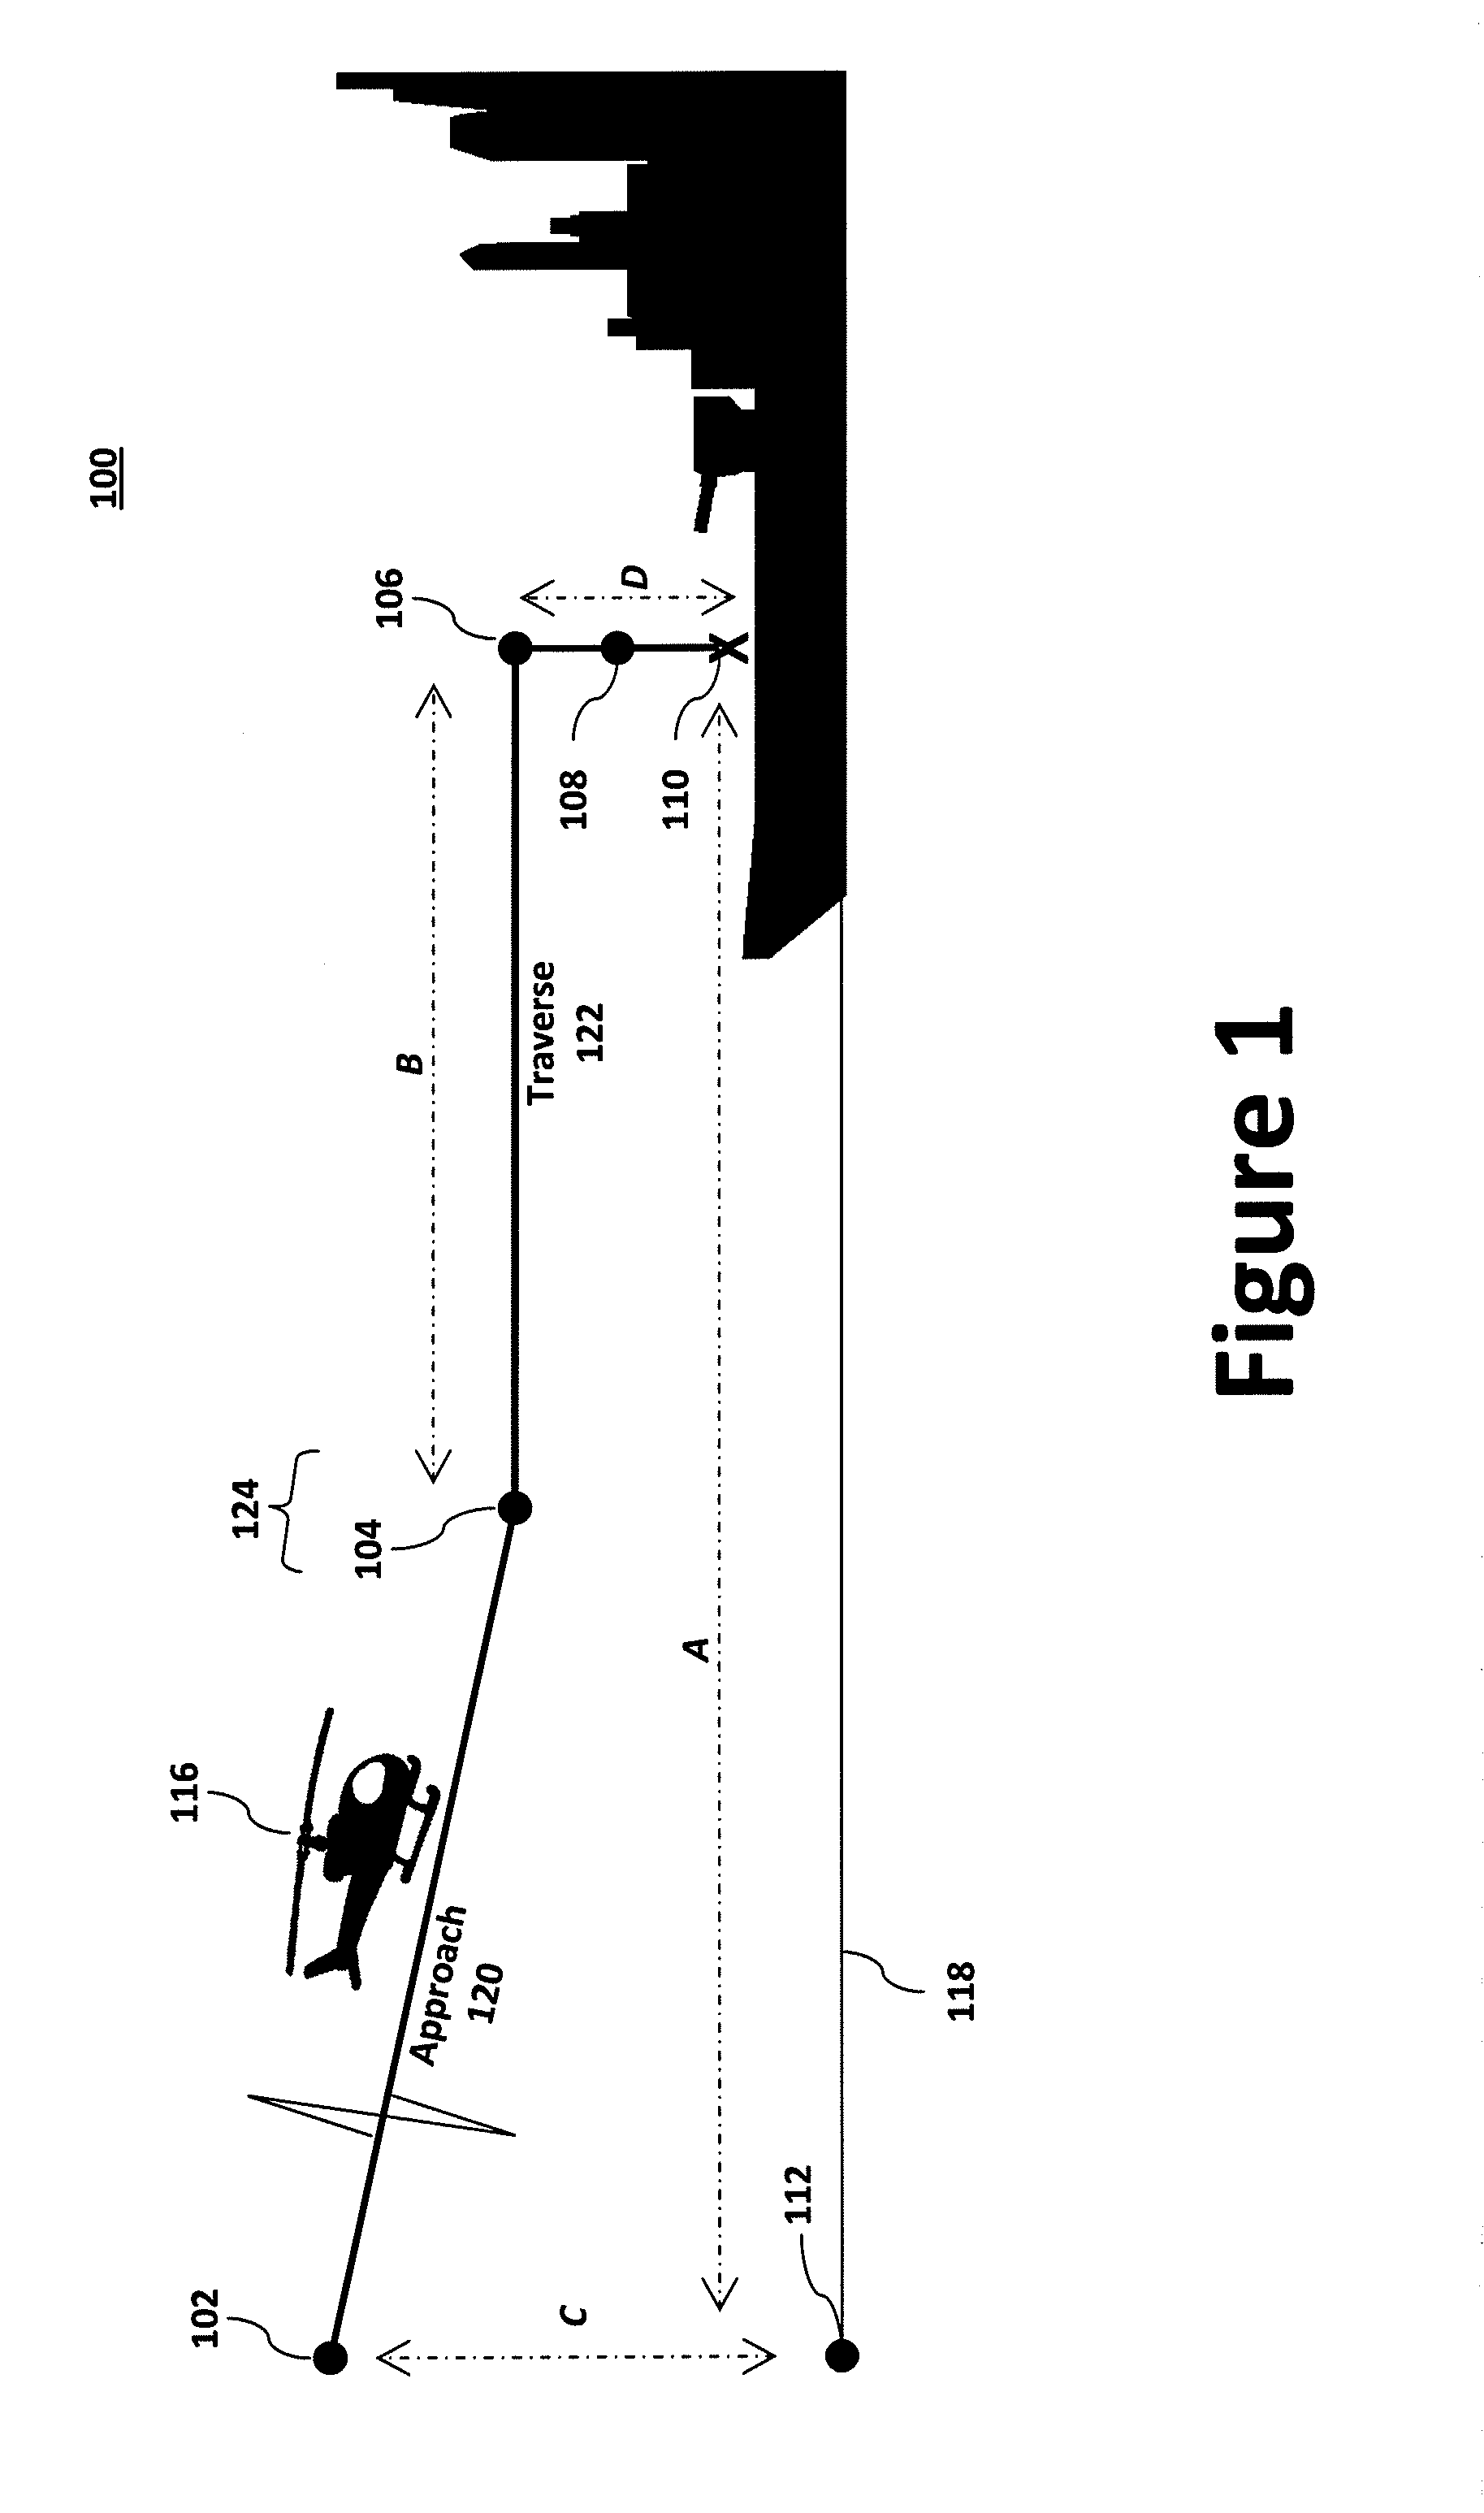 System and methods for automatically landing aircraft